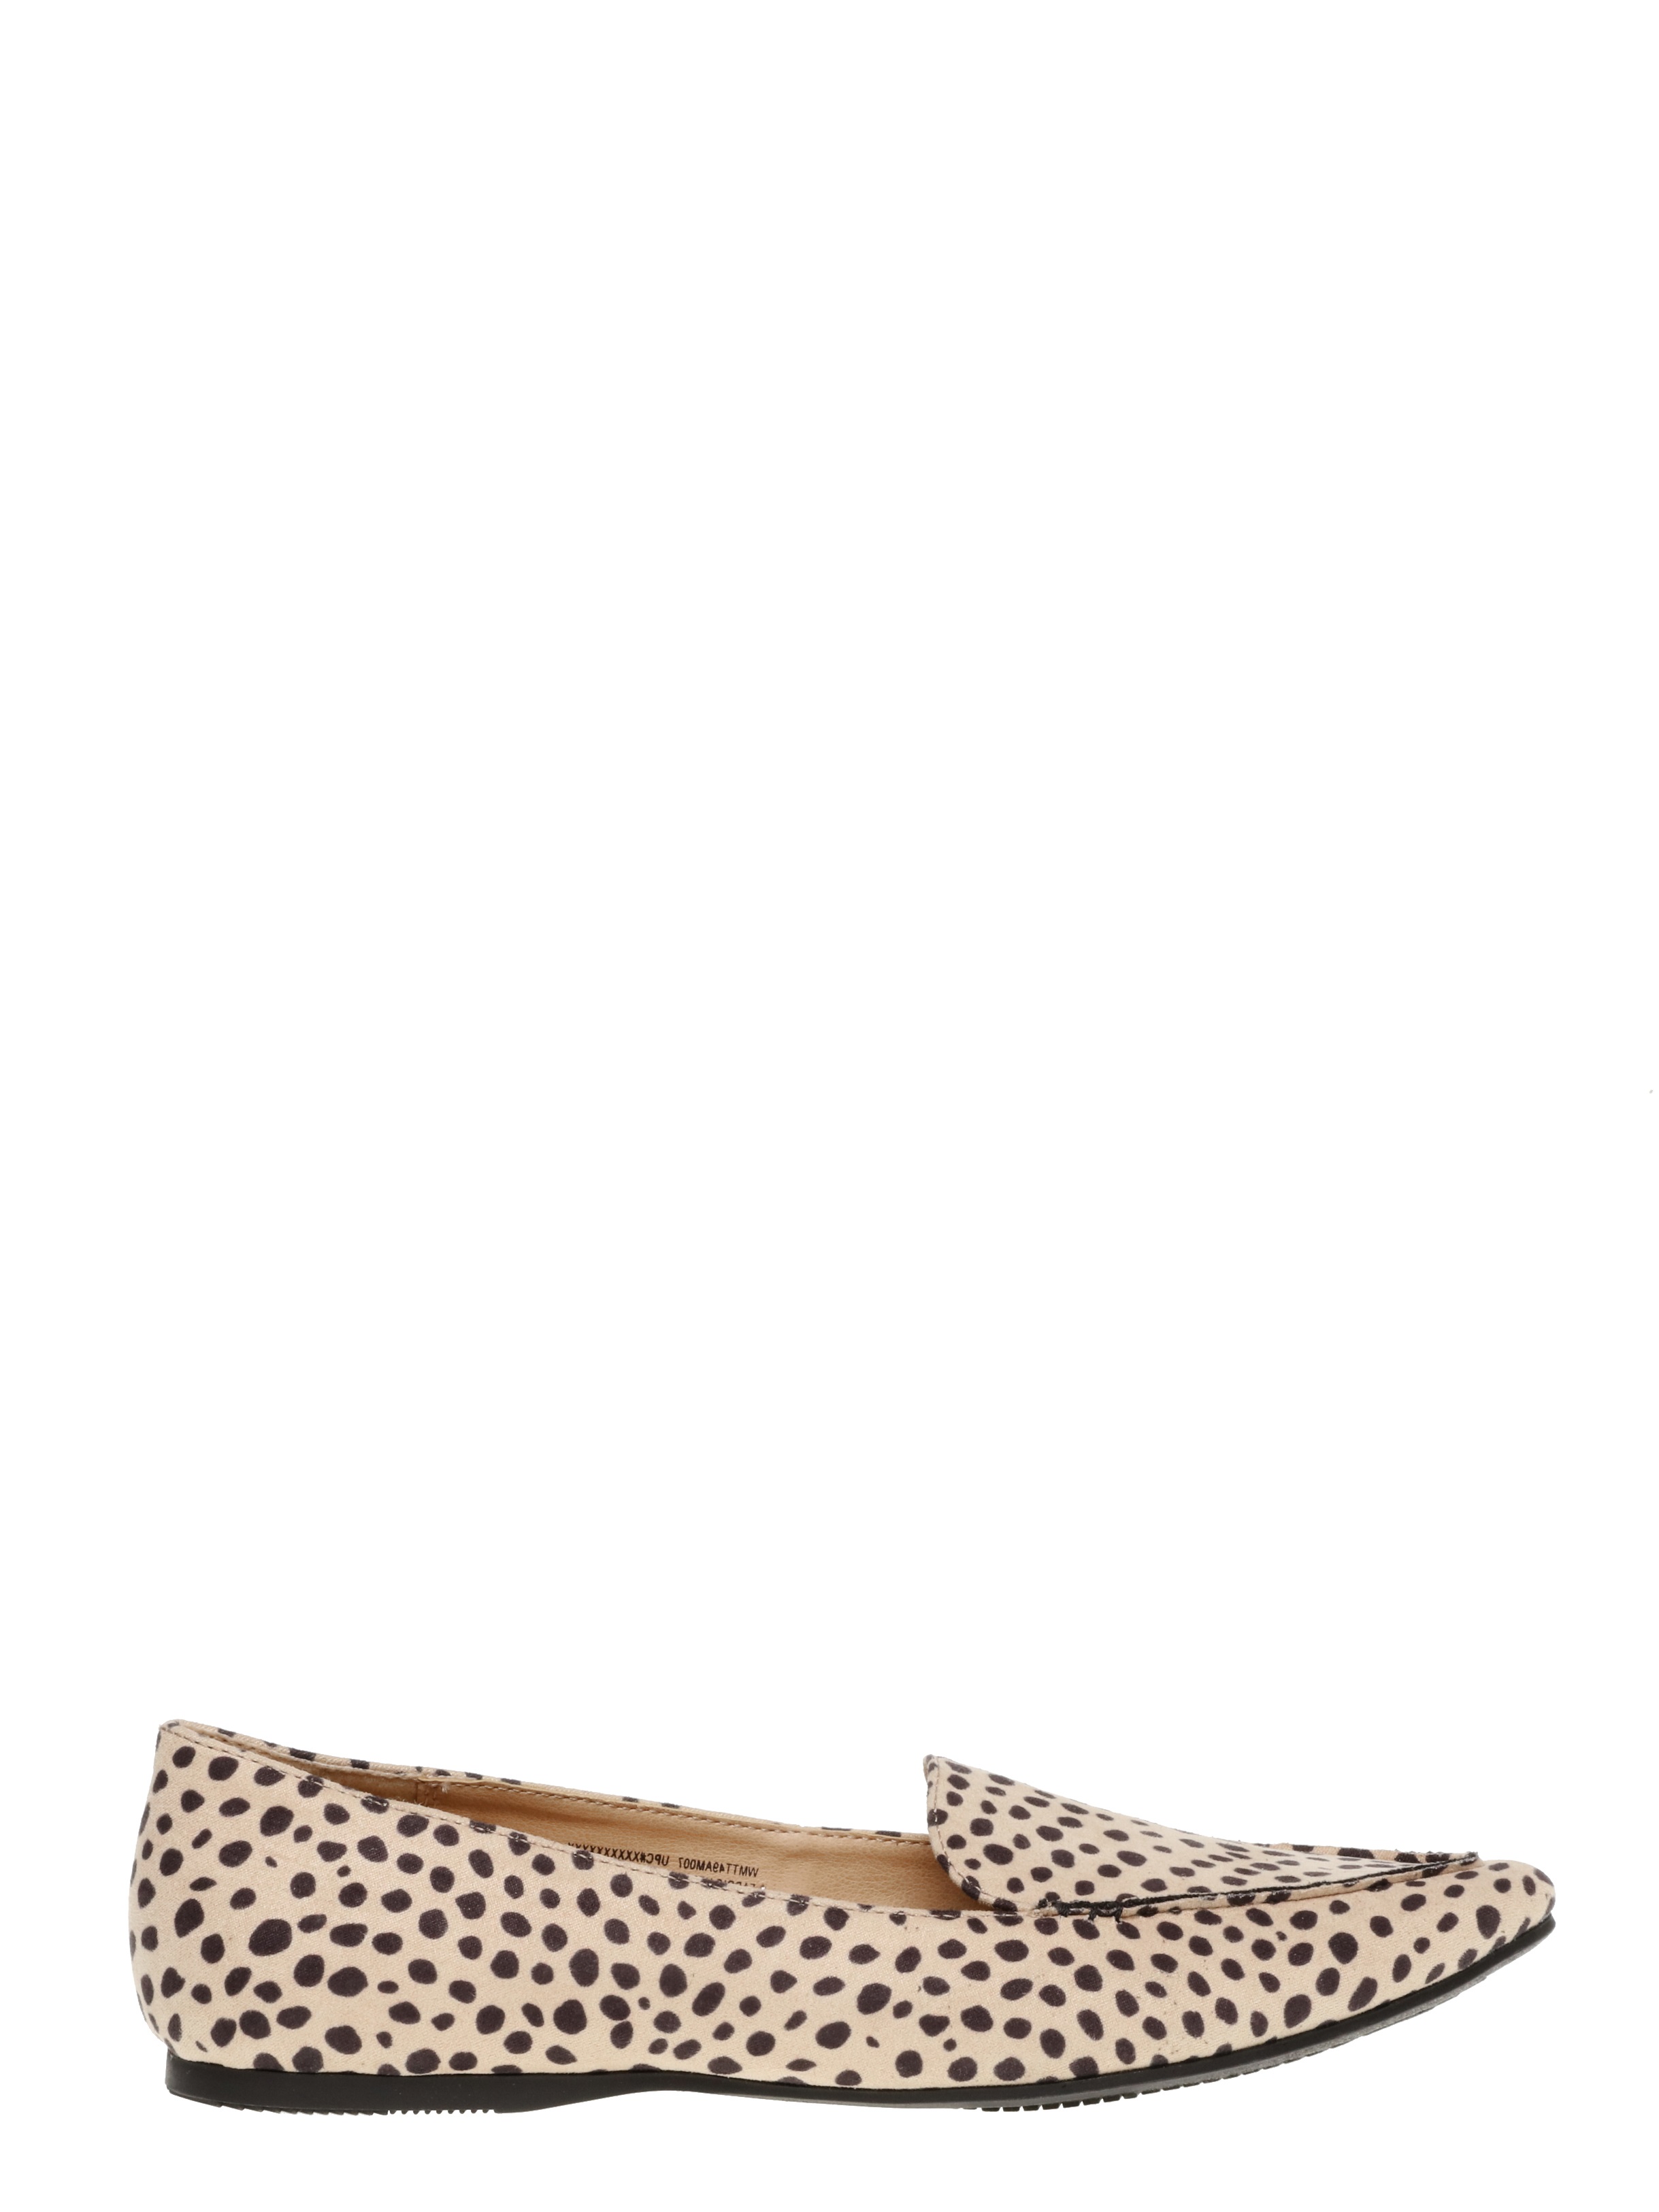 Time and Tru Women’s Animal Print Feather Flats, Wide Width Available - image 2 of 6